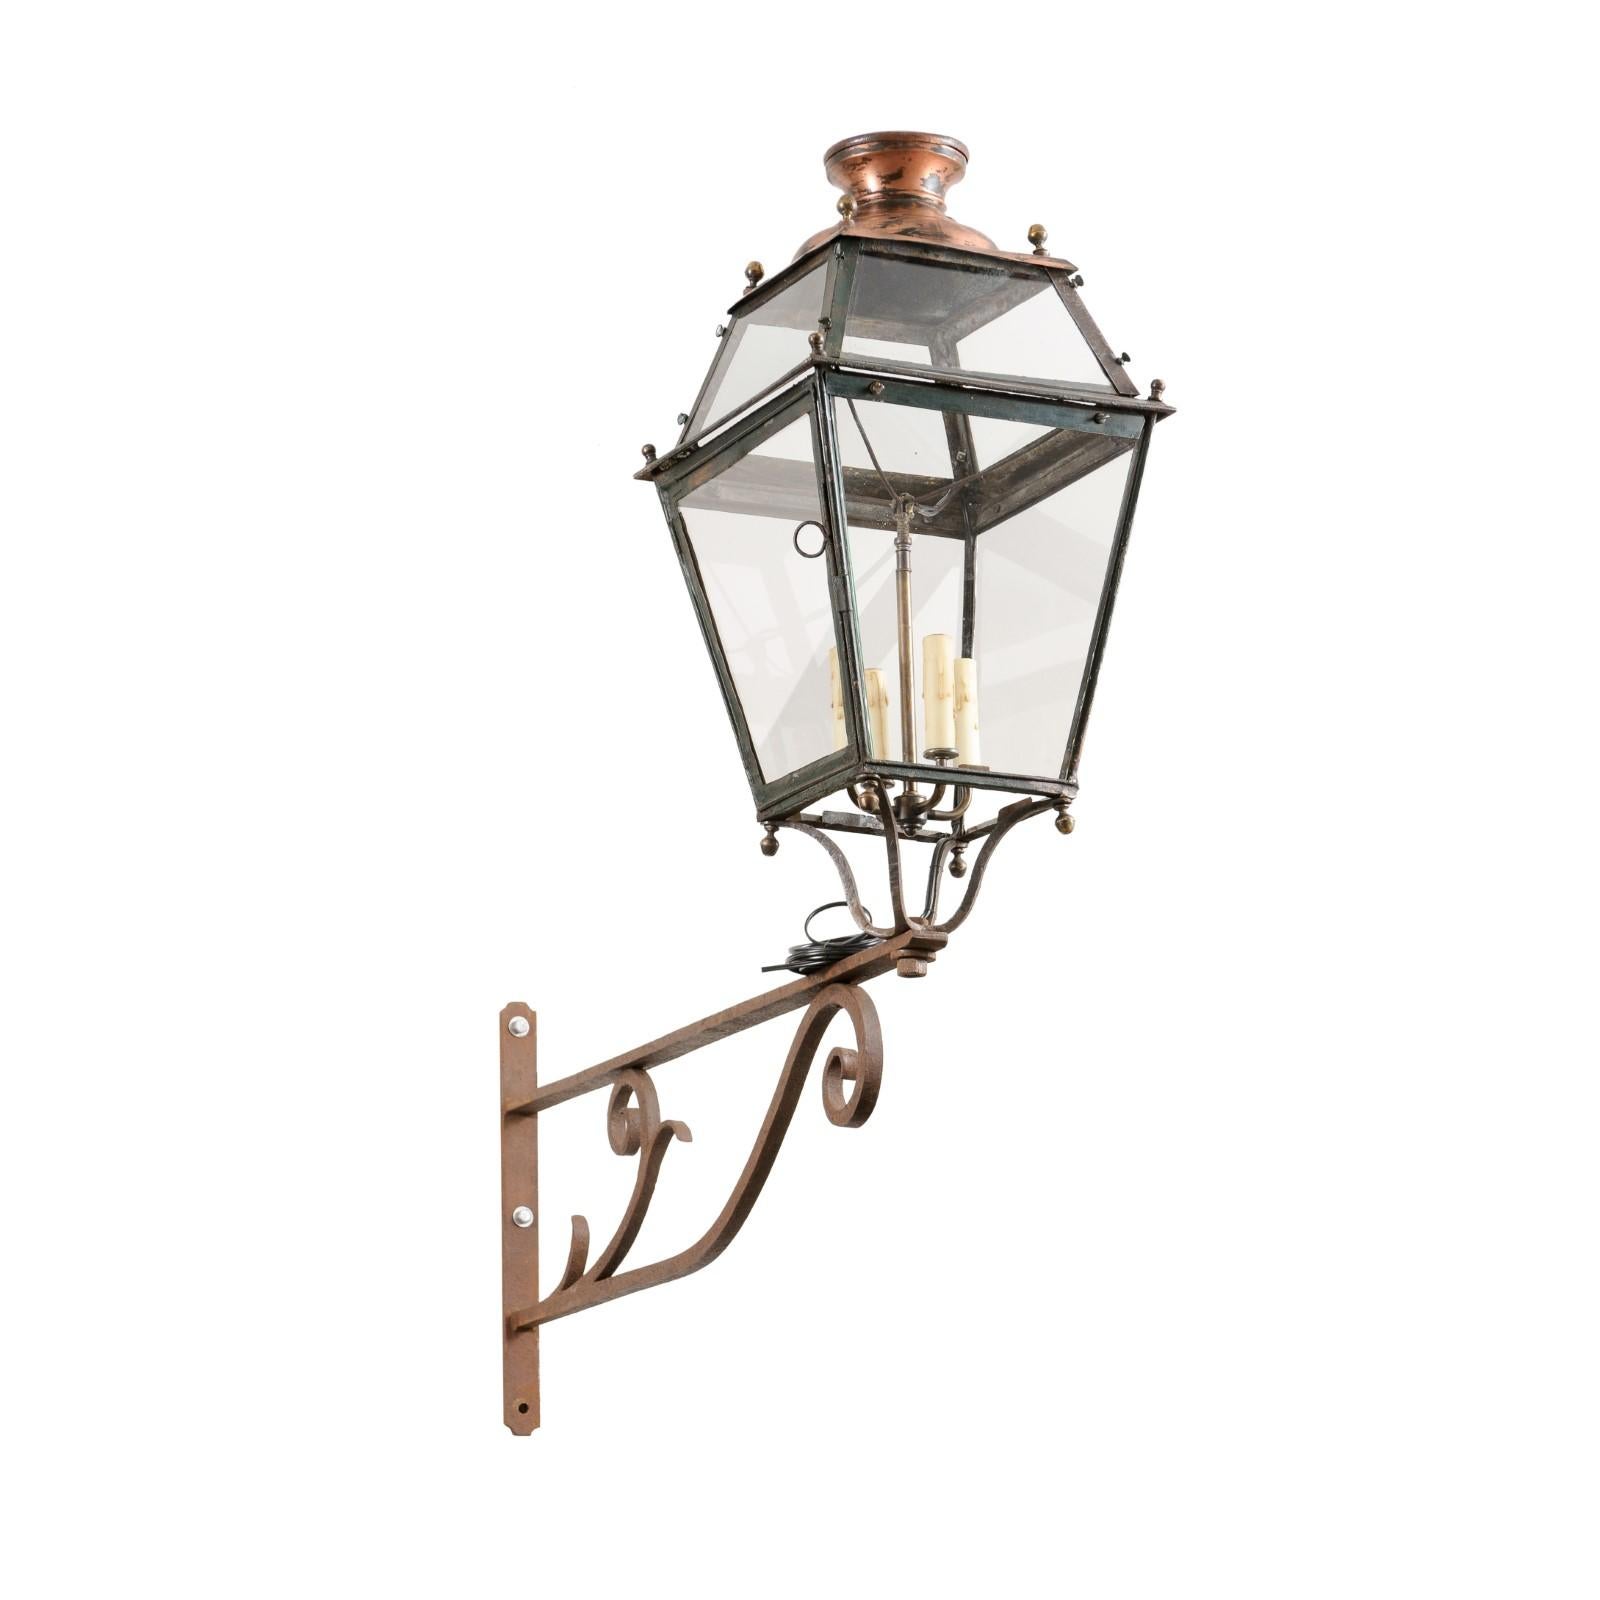 French 1890s Iron and Copper Wall Lantern with Four Lights and Scrolling Bracket For Sale 4